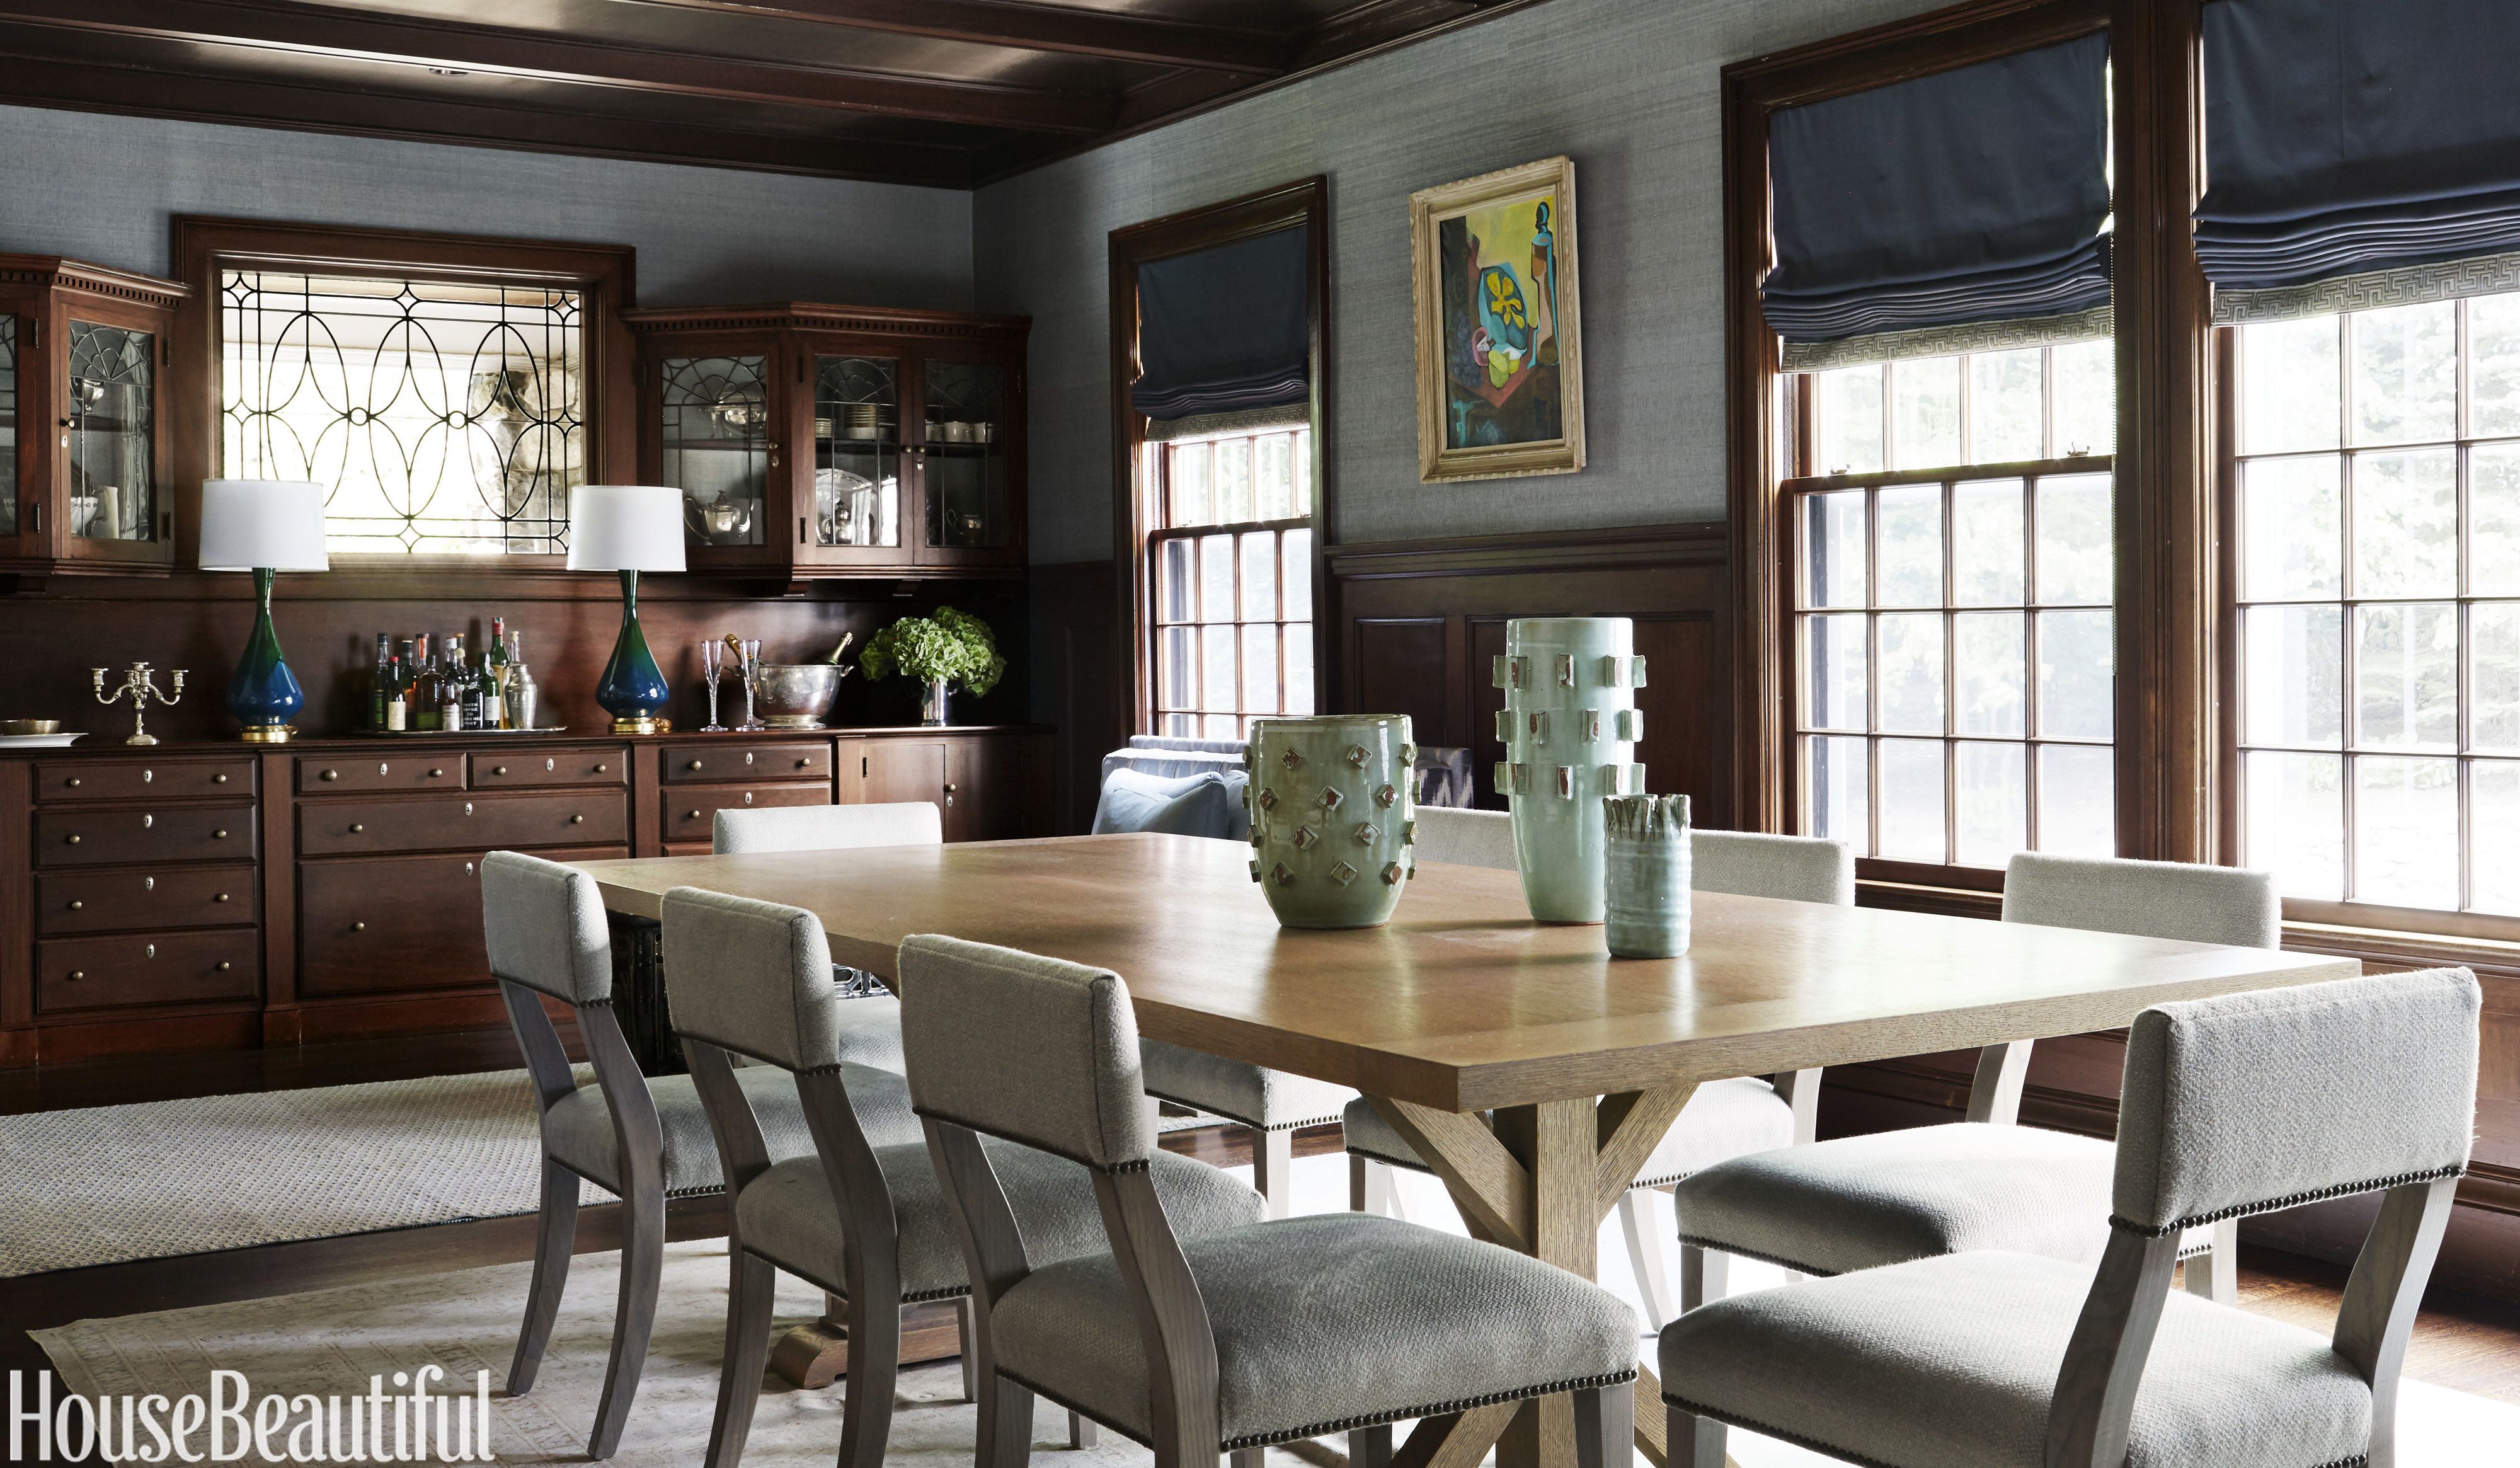 15 Rustic Dining Room Ideas Best, Rustic Modern Dining Room Table And Chairs